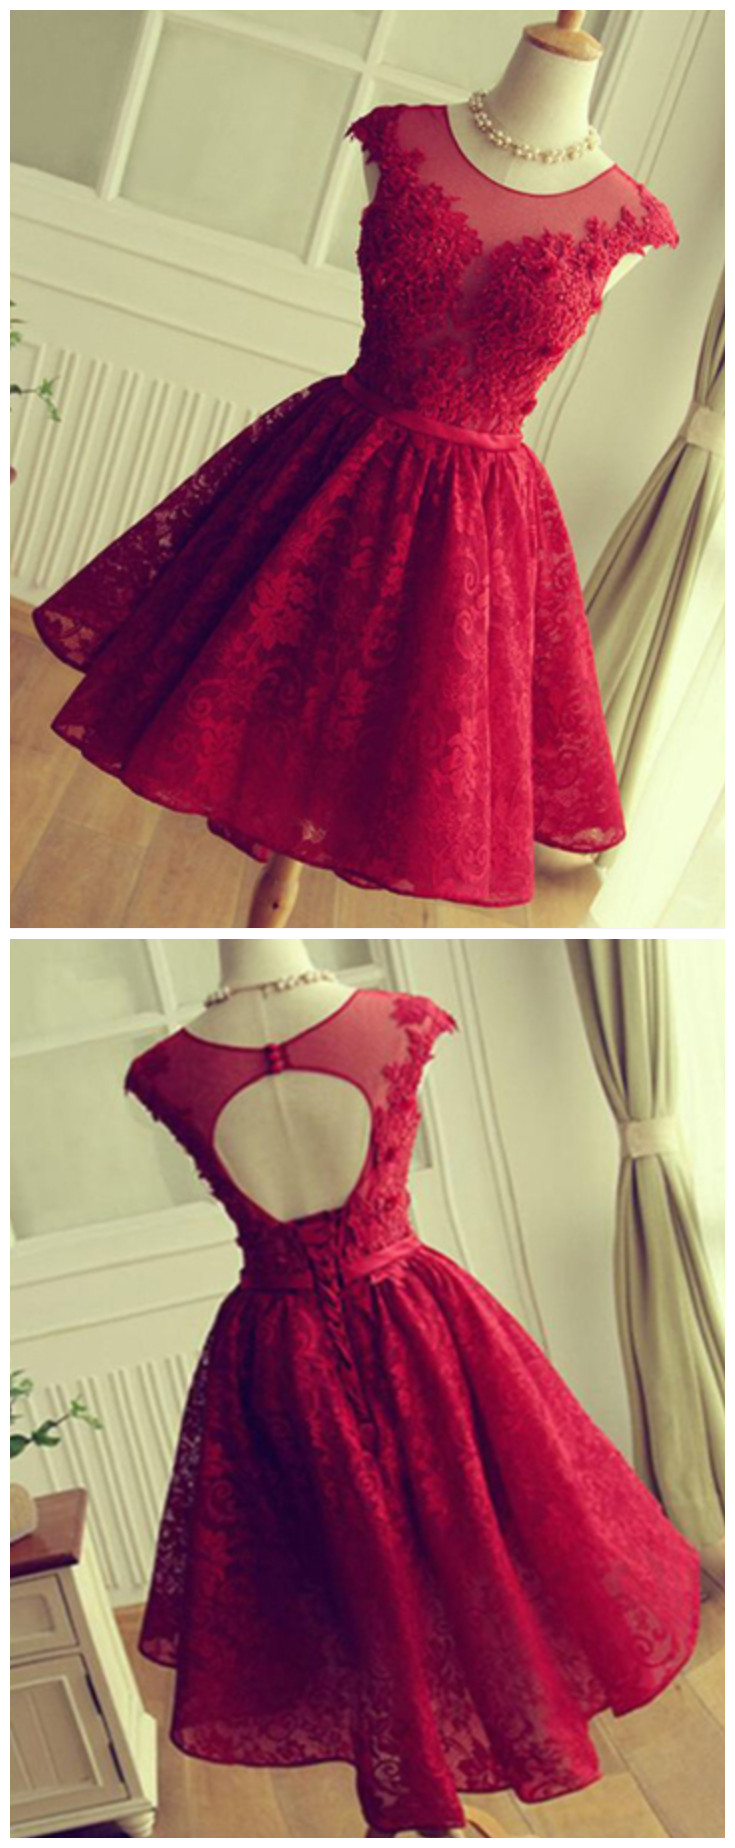 Spark Queen Red Lace Homecoming Dresses, Lace Prom Dress, 2020 Homecoming Dress, Short Homecoming Dress